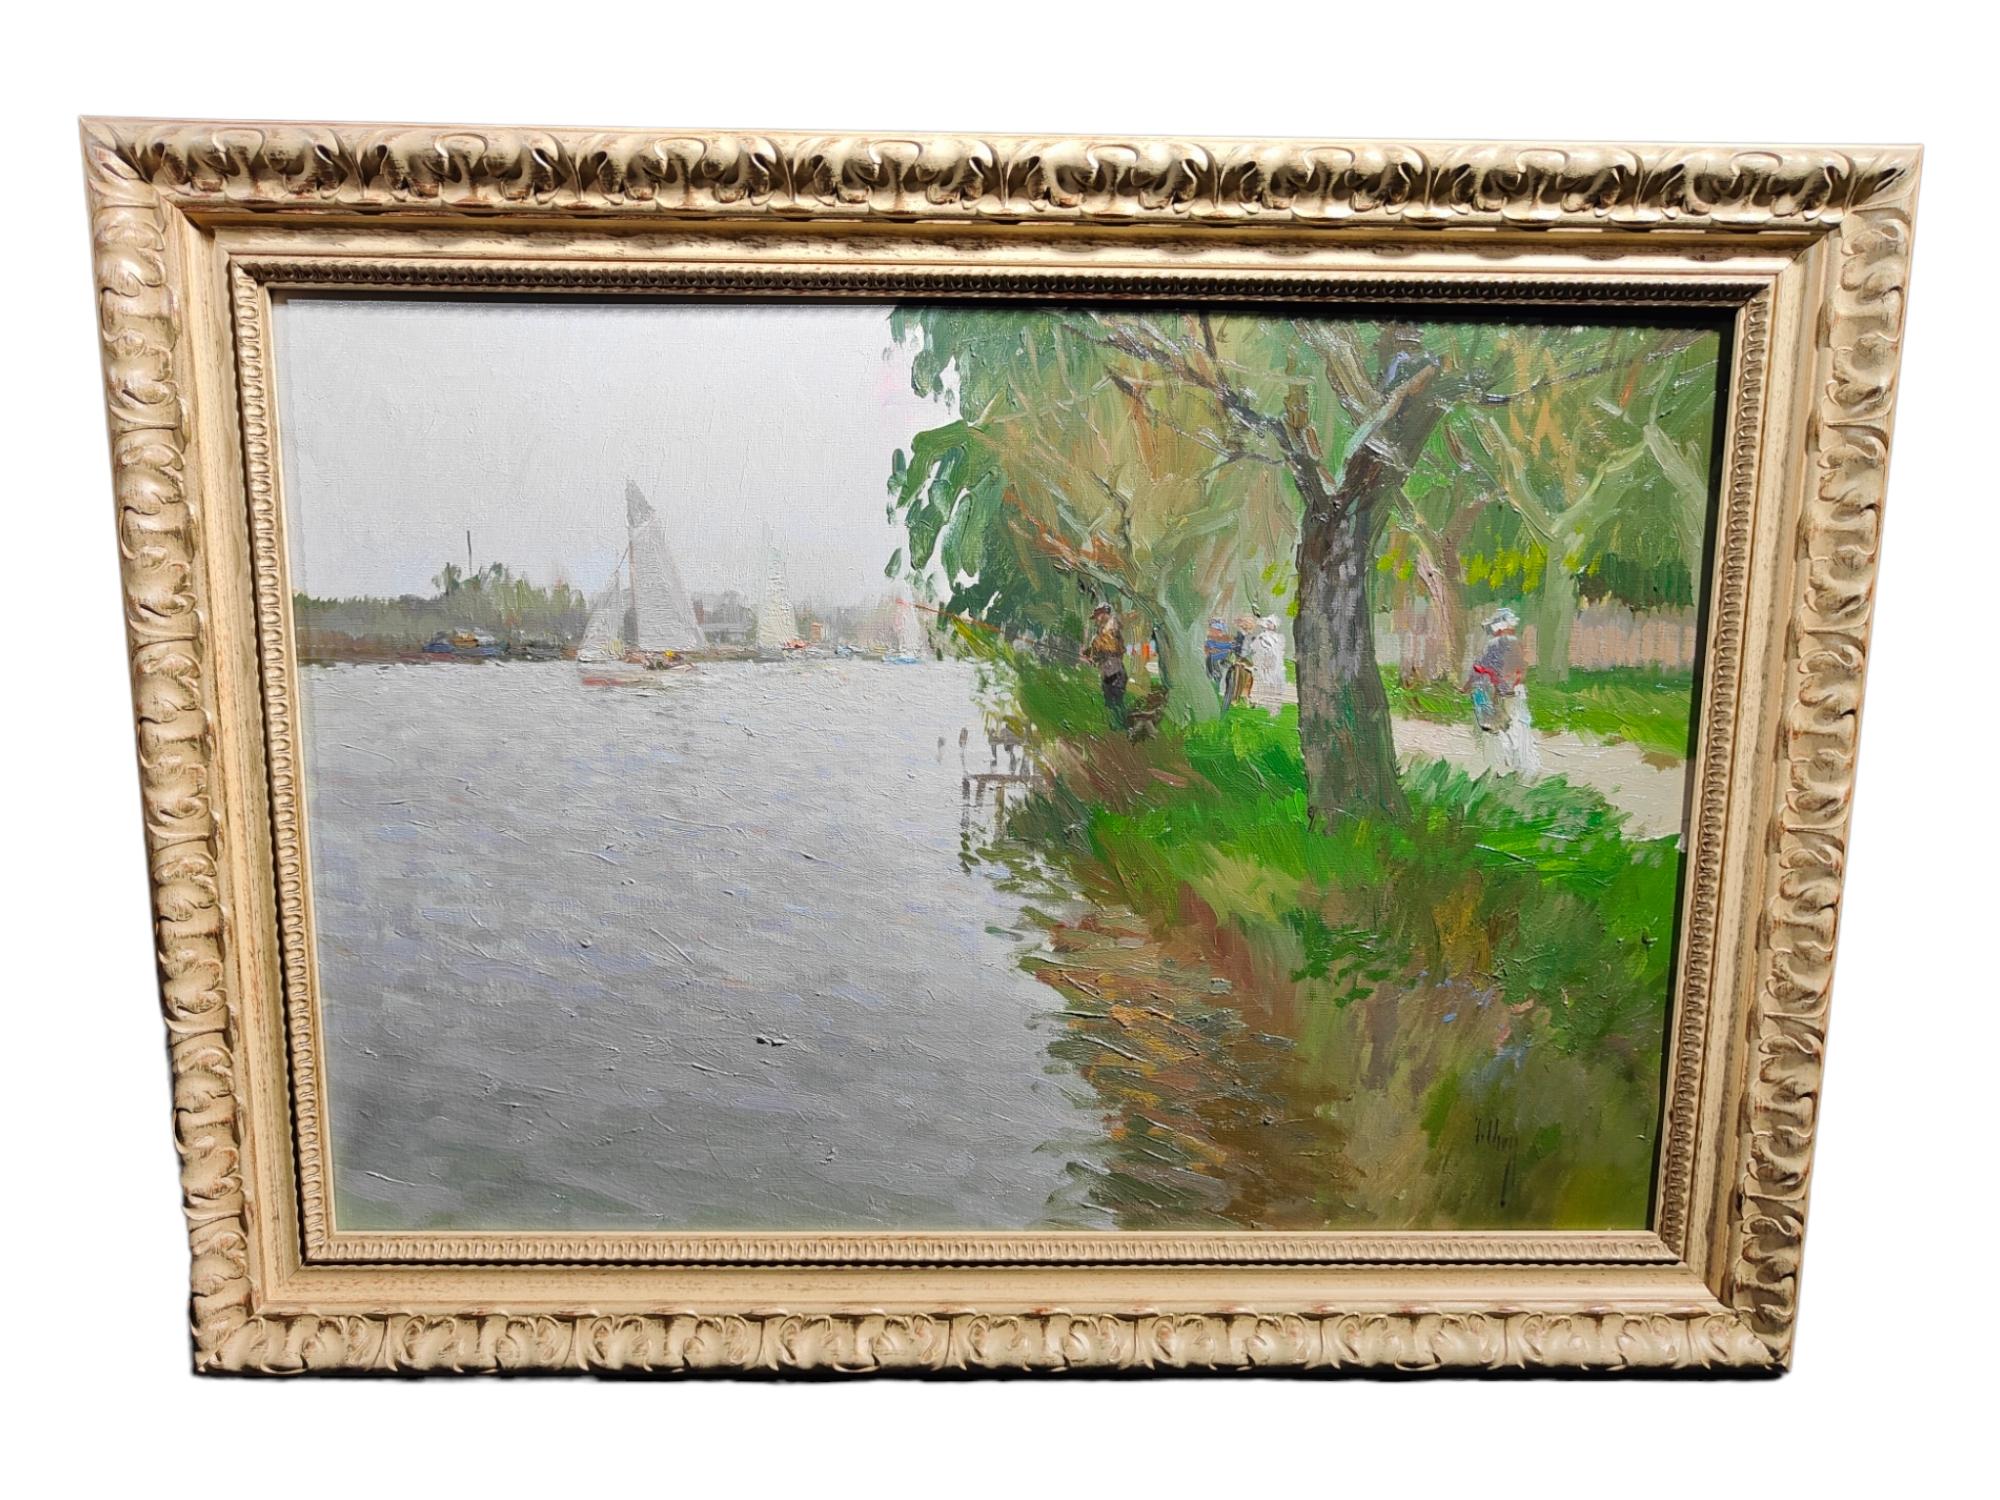 Impressionist Oil 20th Century
ELEGANT 1950s FRENCH IMPRESSIONIST OIL. UNREADABLE SIGNATURE. GOOD CONDITION. TITLE: POETRY - MEASUREMENTS: 86X64 AND 73X50 CM